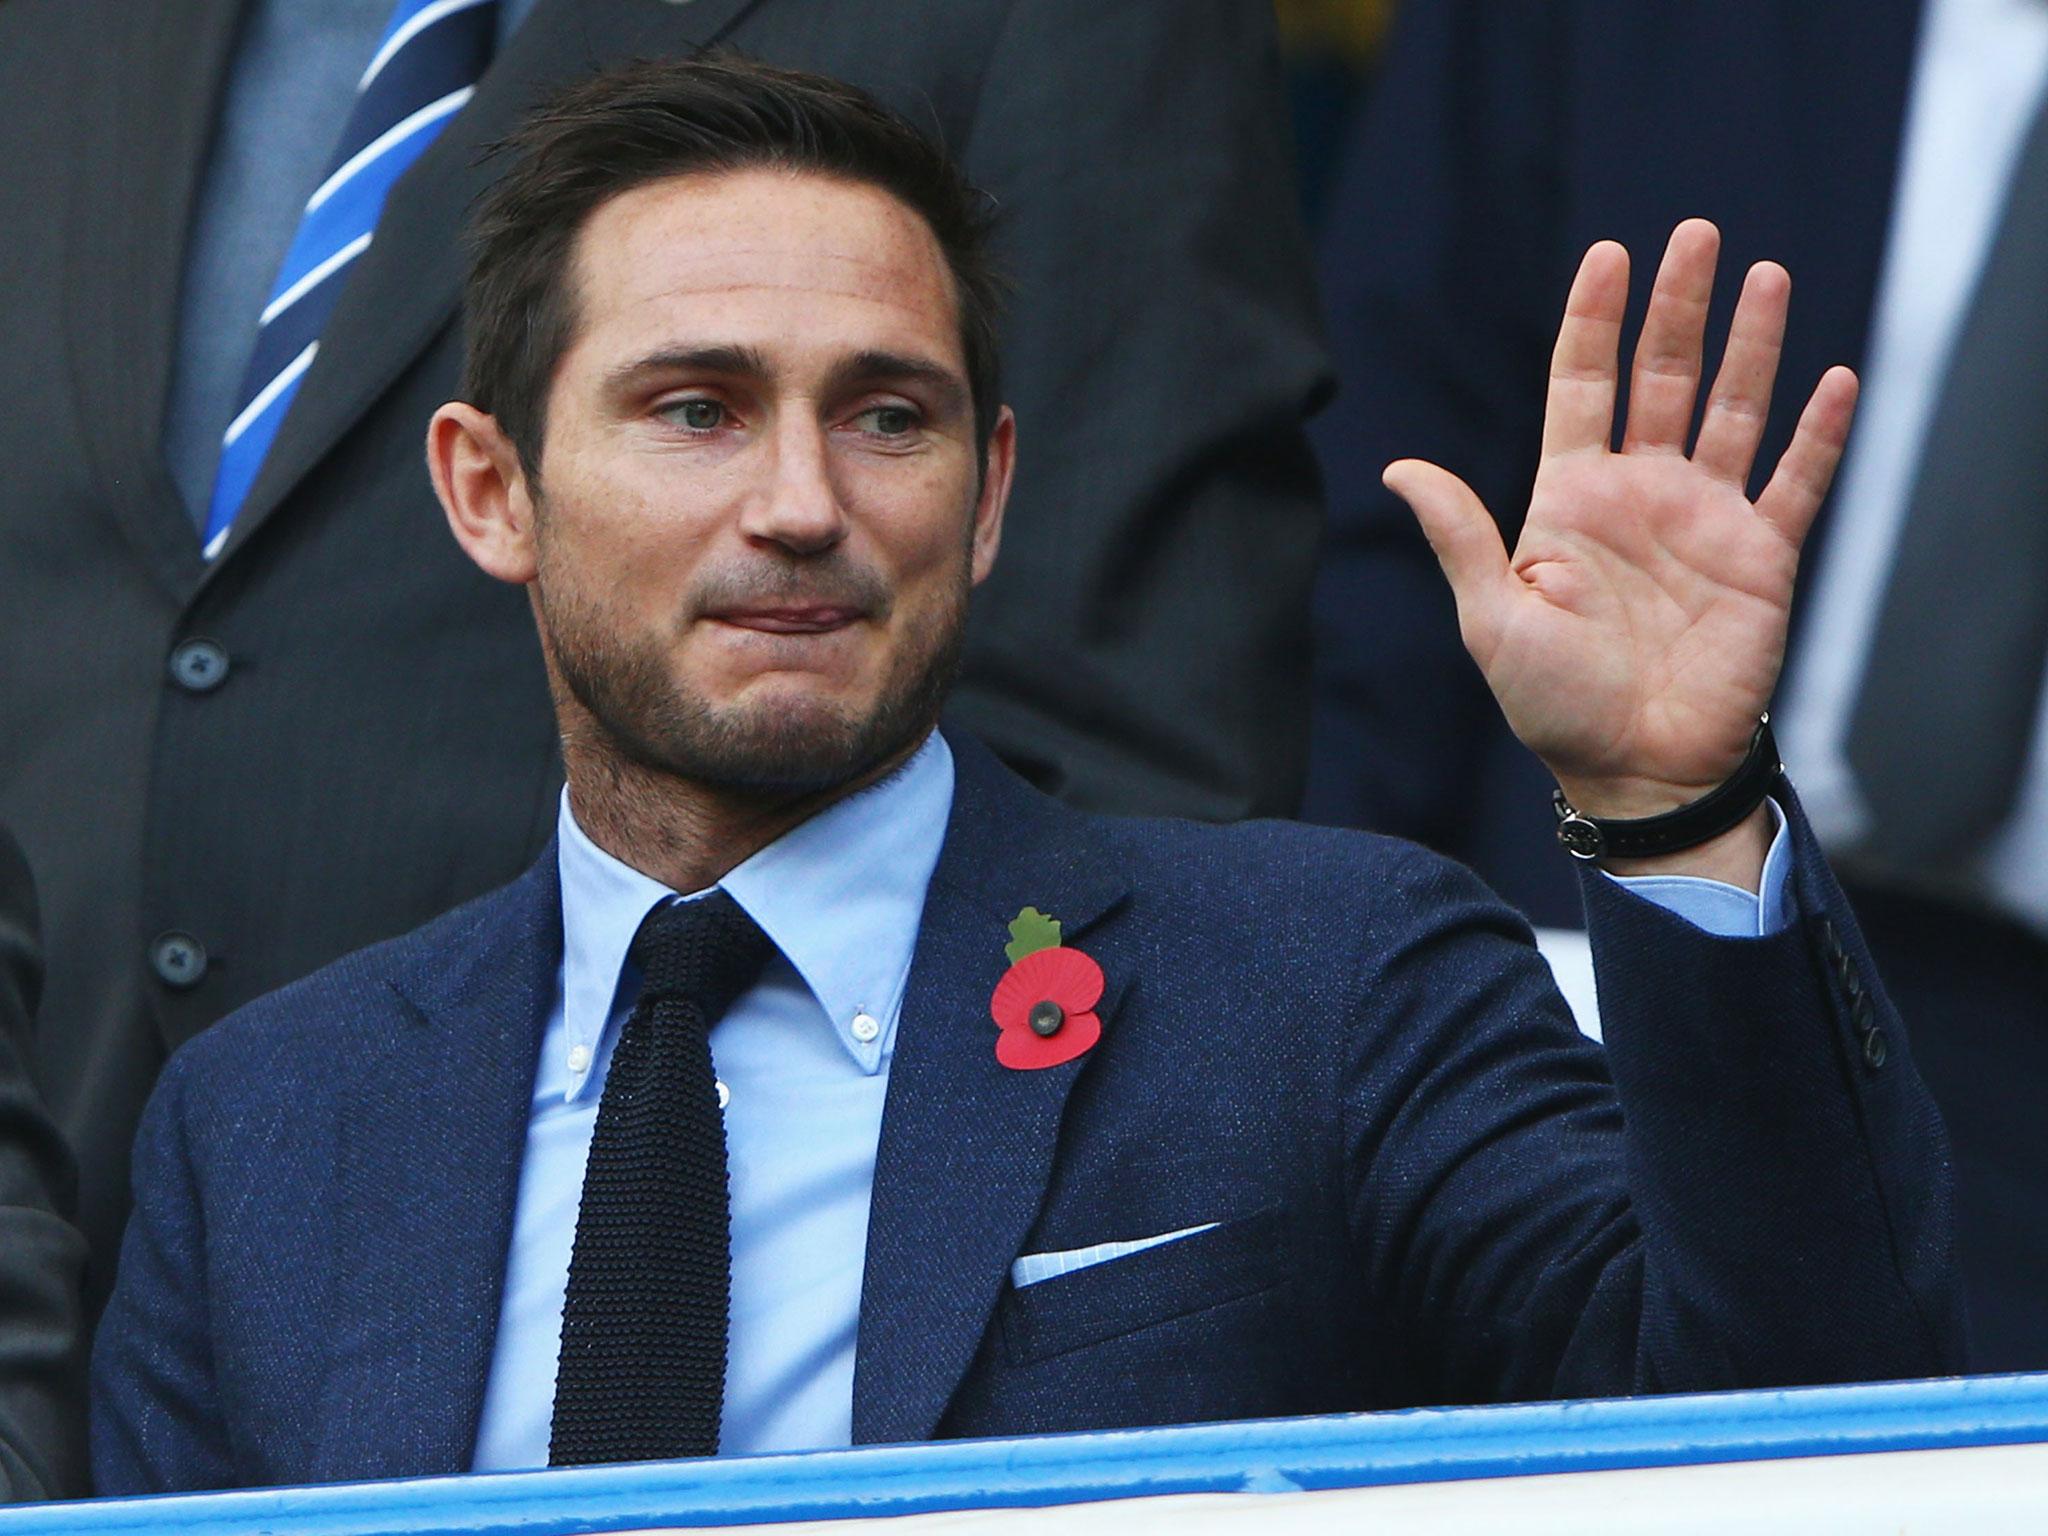 &#13;
Lampard is Chelsea's all-time top goalscorer (Getty)&#13;